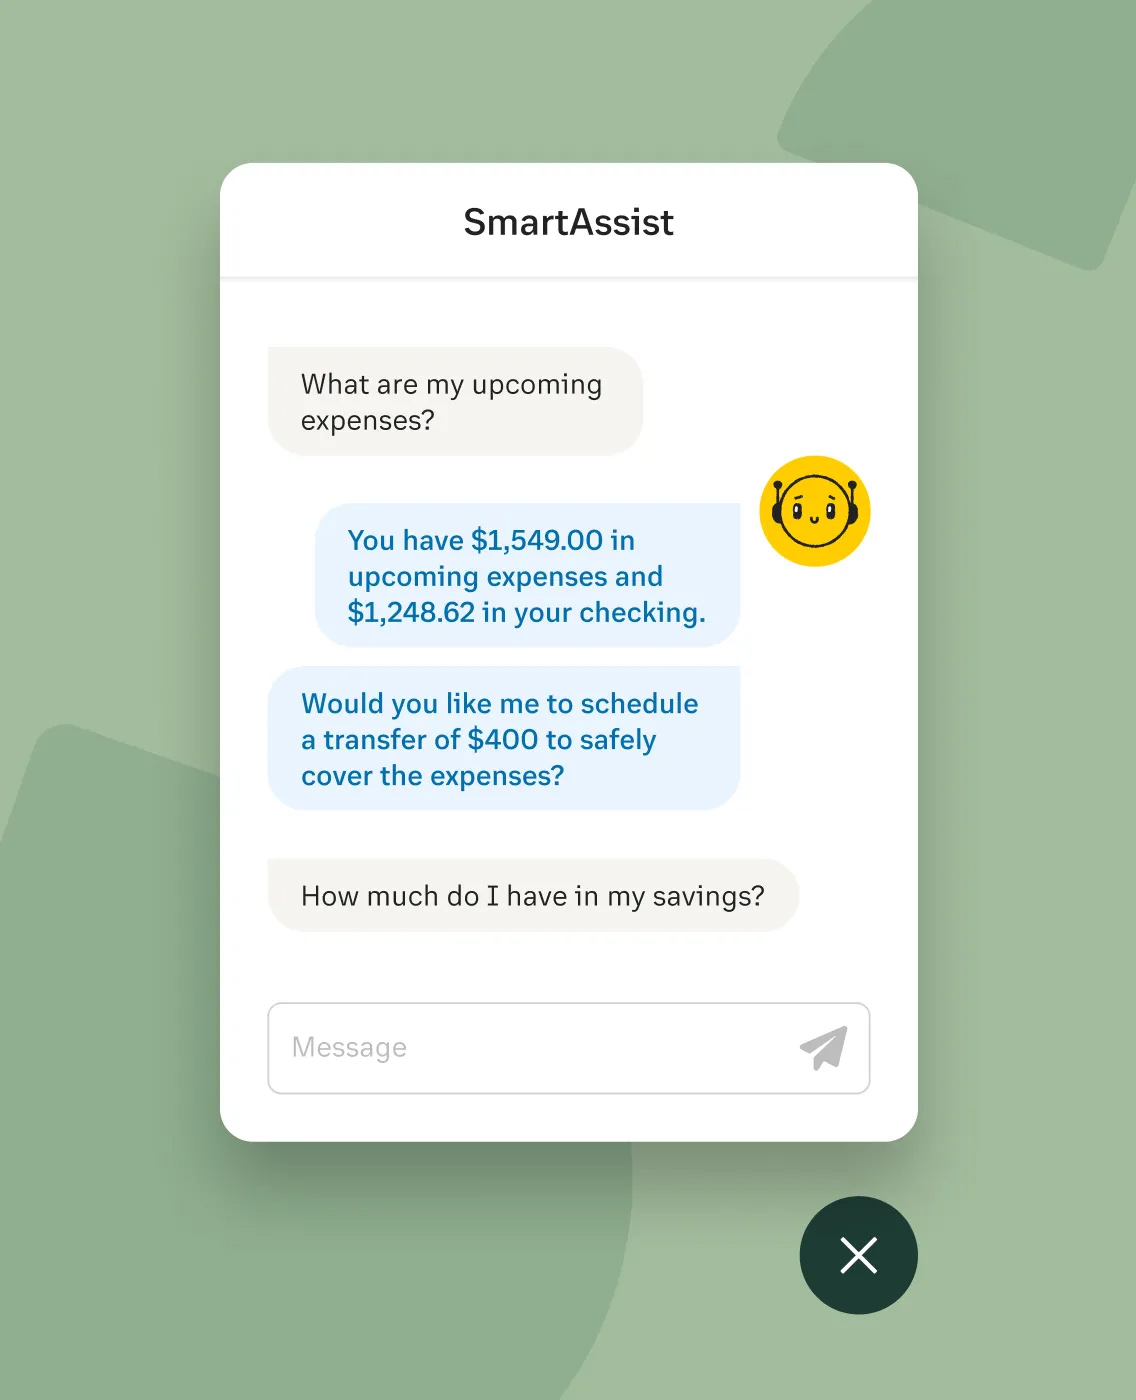 SmartAssist dialog box showing a conversation between a user and the chatbot.